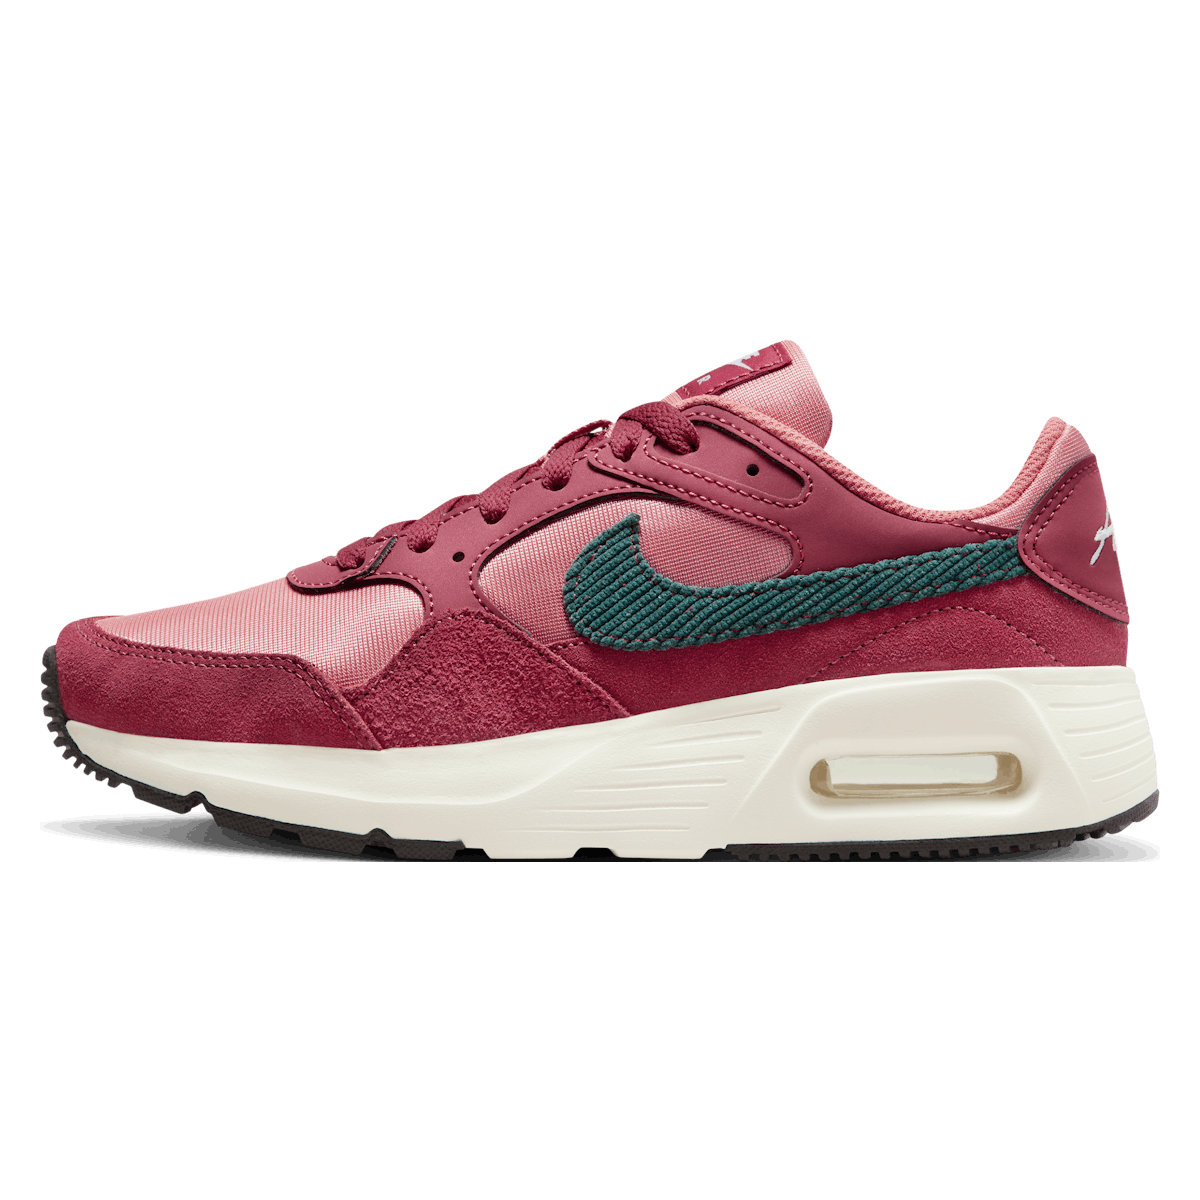 Nike Air Max SC SE Wmns "Red Stardust"